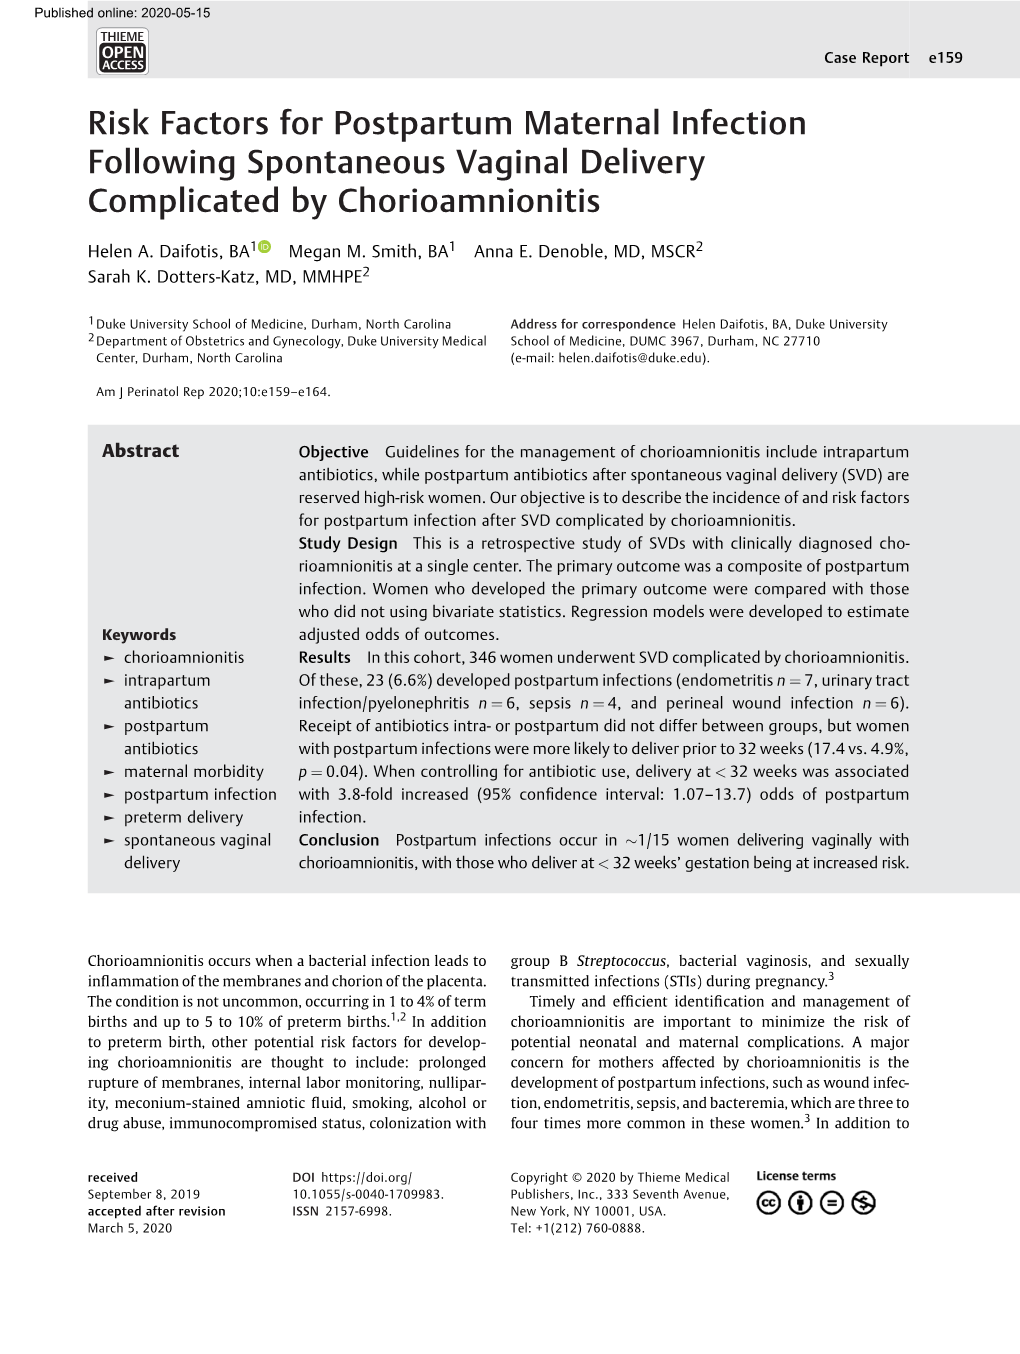 Risk Factors for Postpartum Maternal Infection Following Spontaneous Vaginal Delivery Complicated by Chorioamnionitis